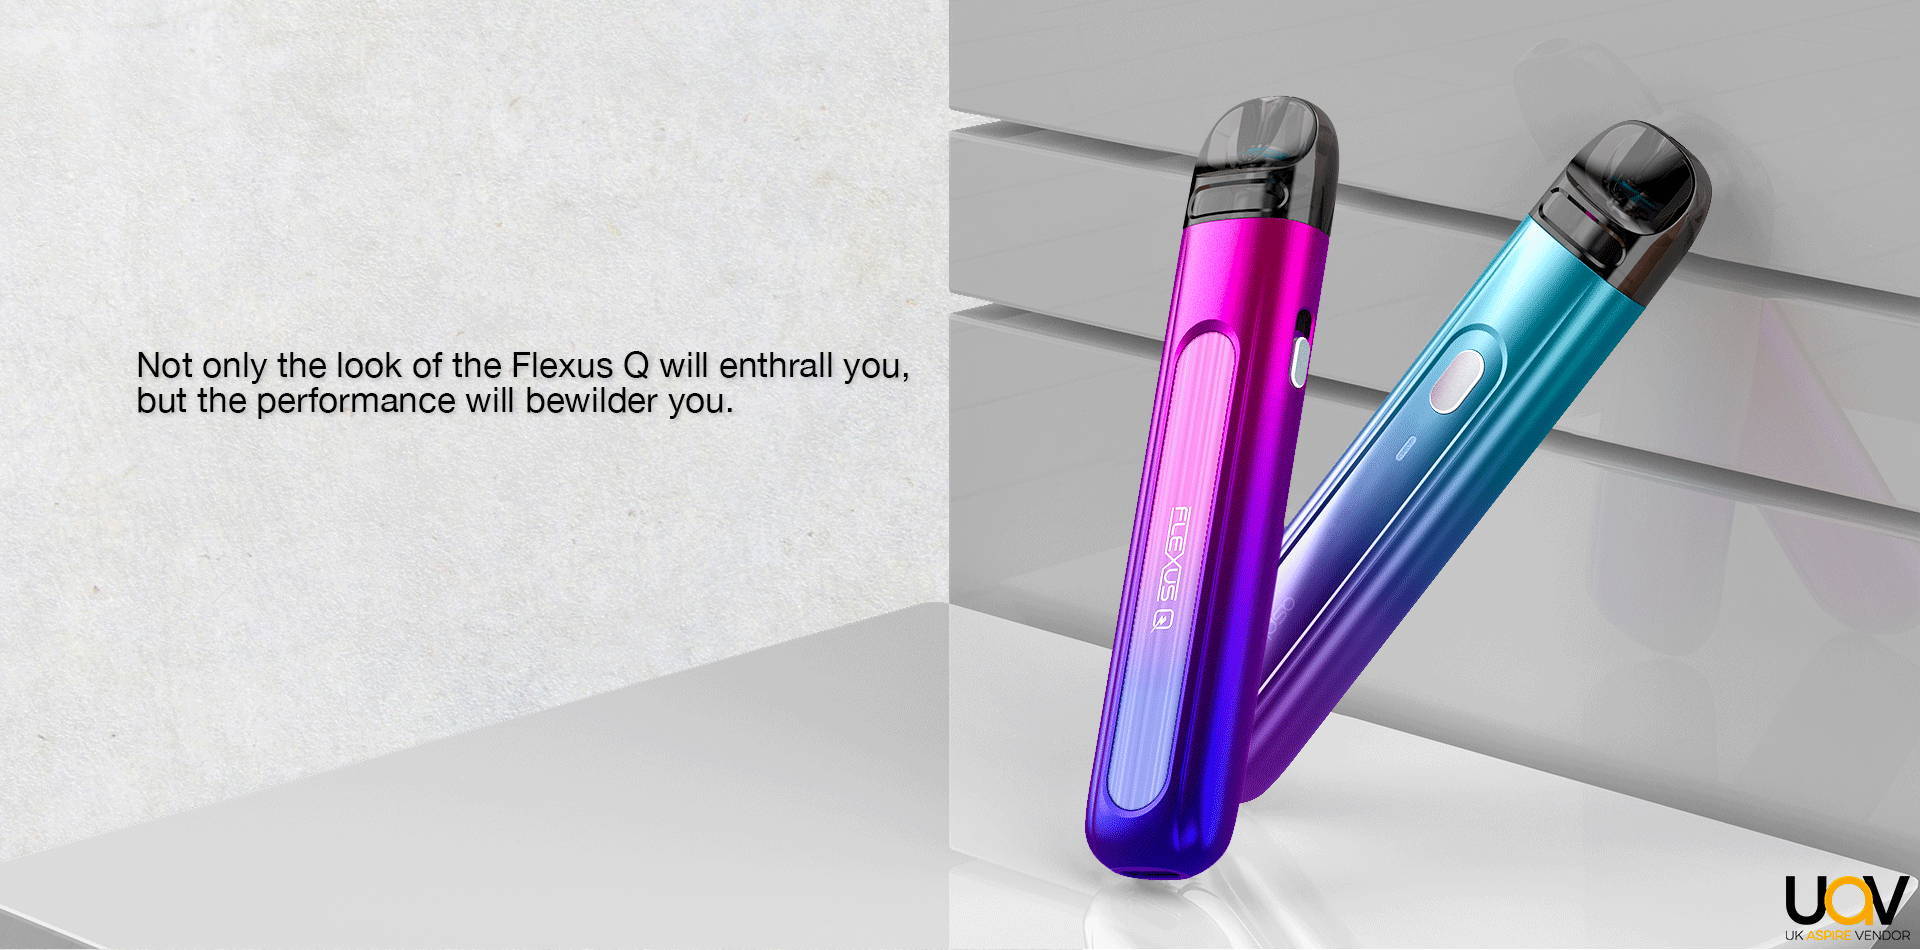 Not only the look of the Flexus Q will enthrall you, but the performance will bewilder you.